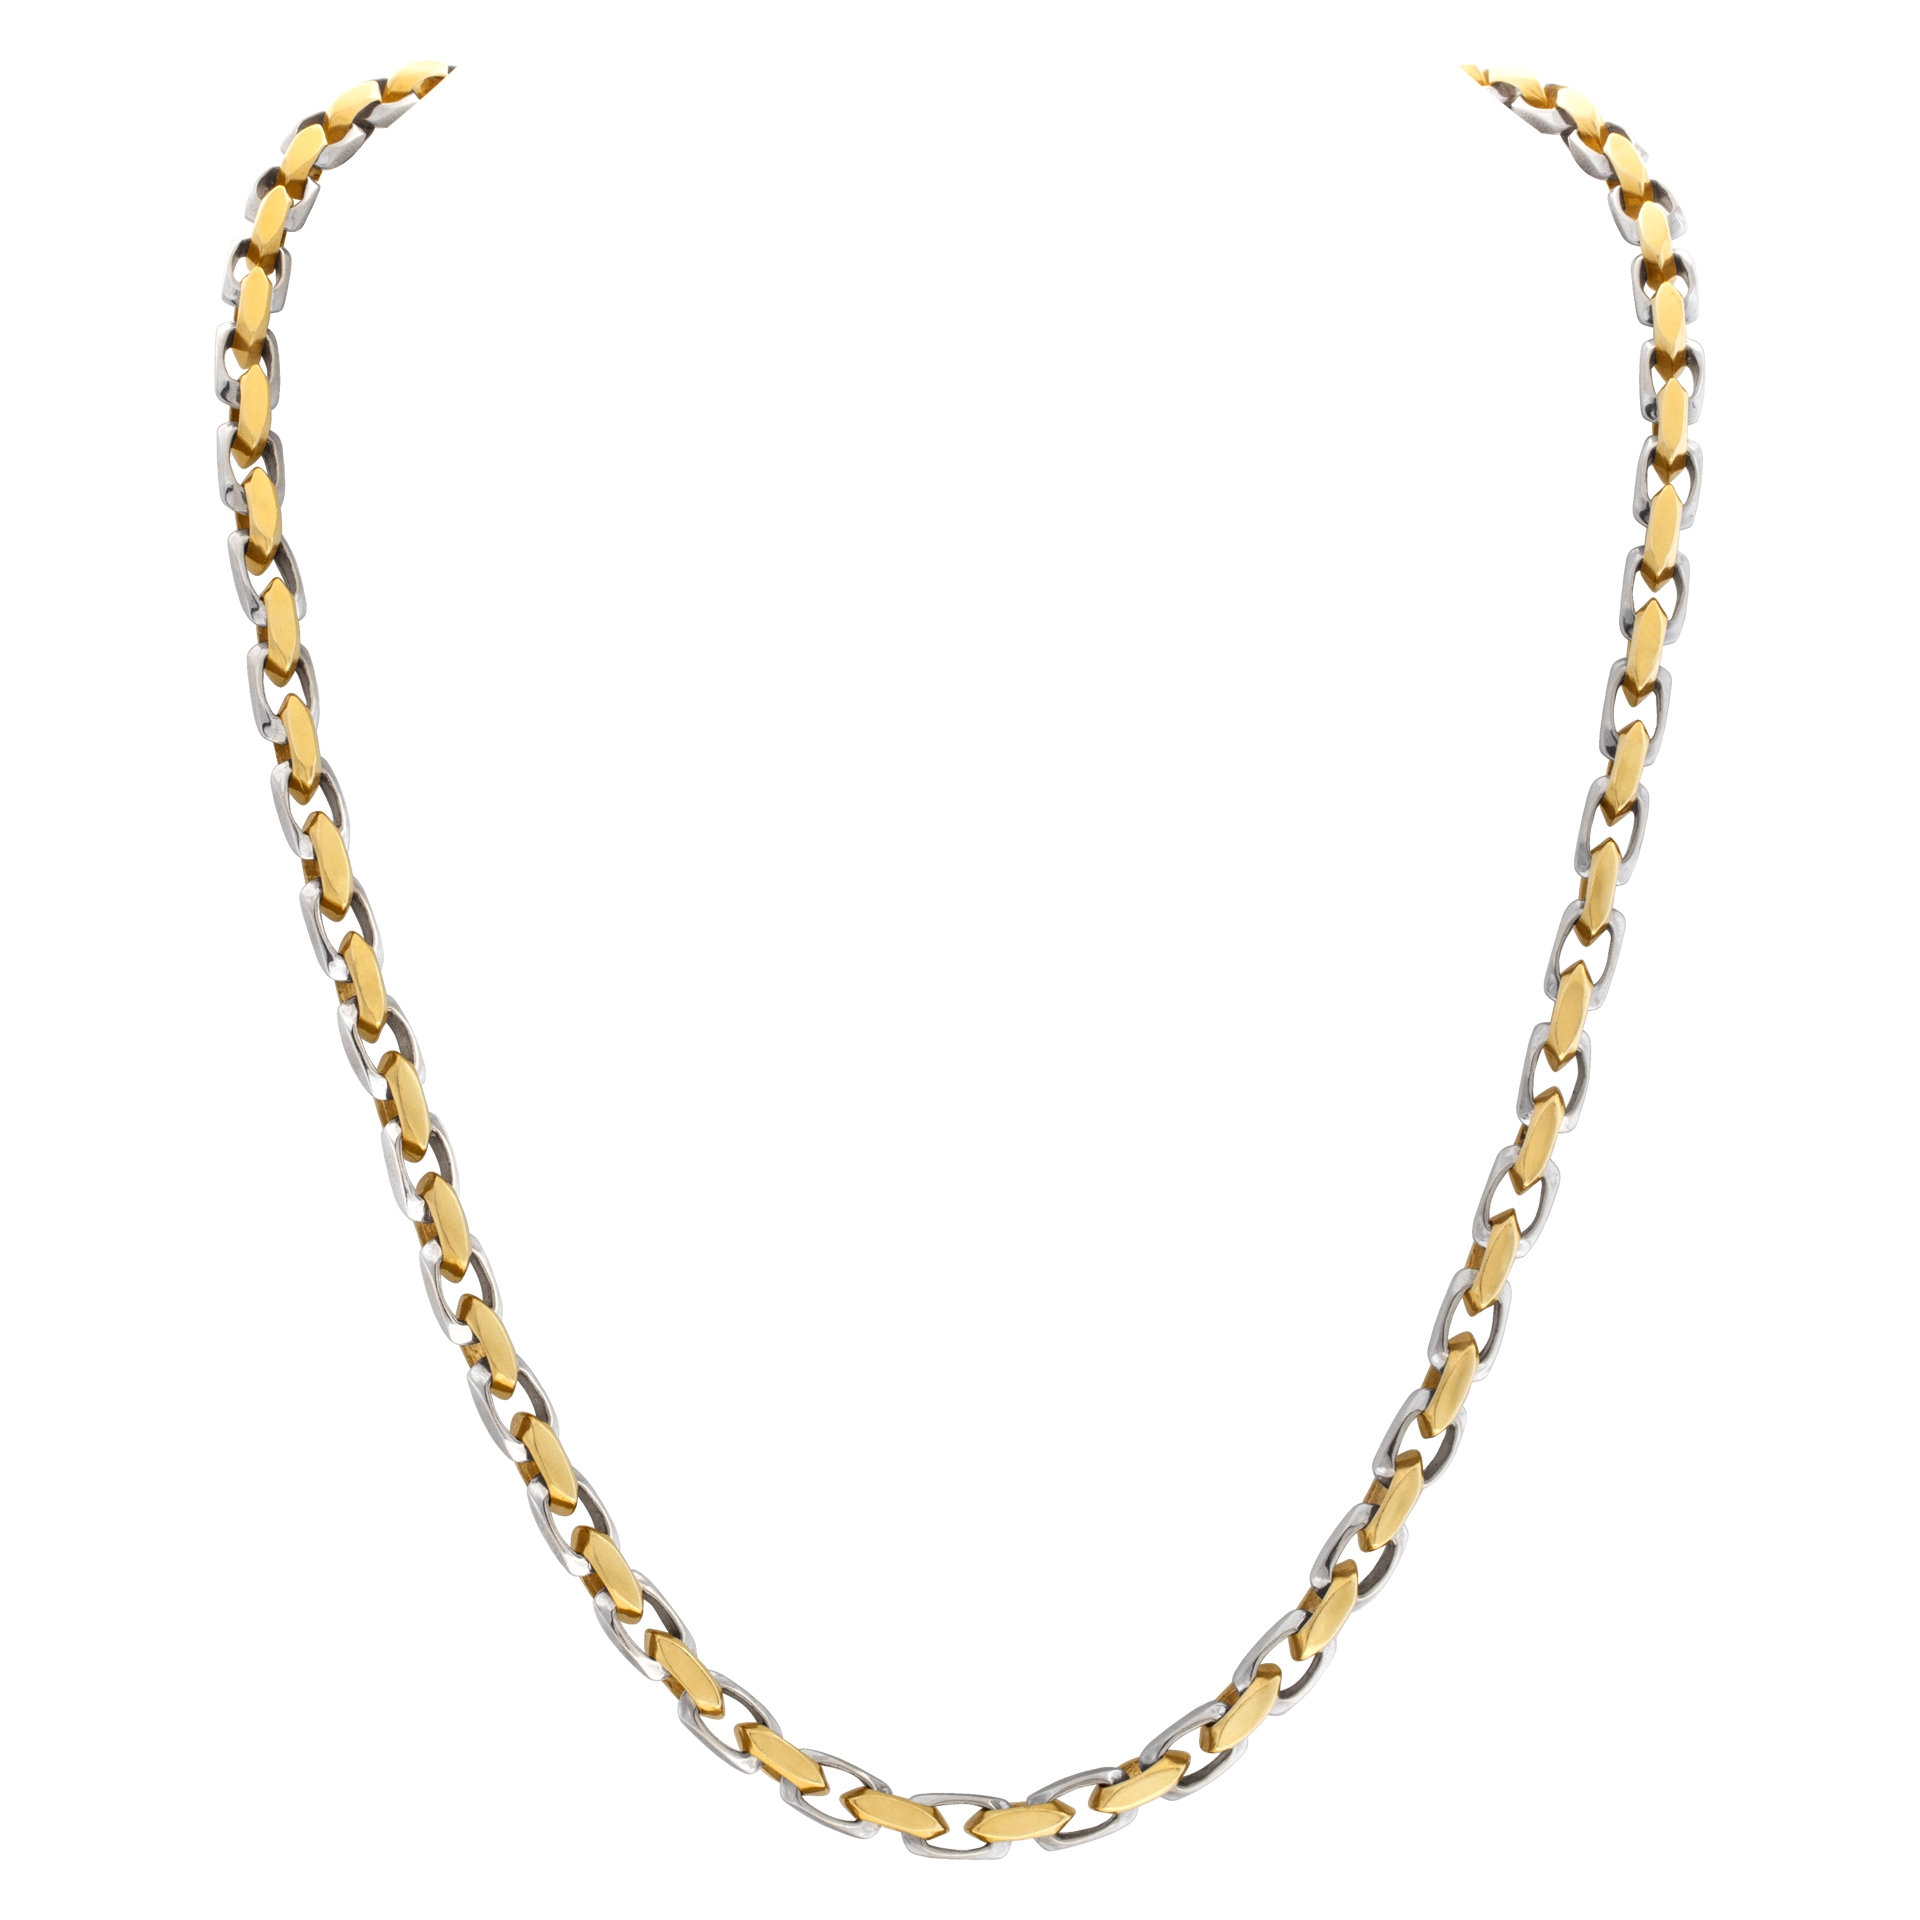 Braccio heavy solid 18k white and yellow gold mens chunky chain image 1